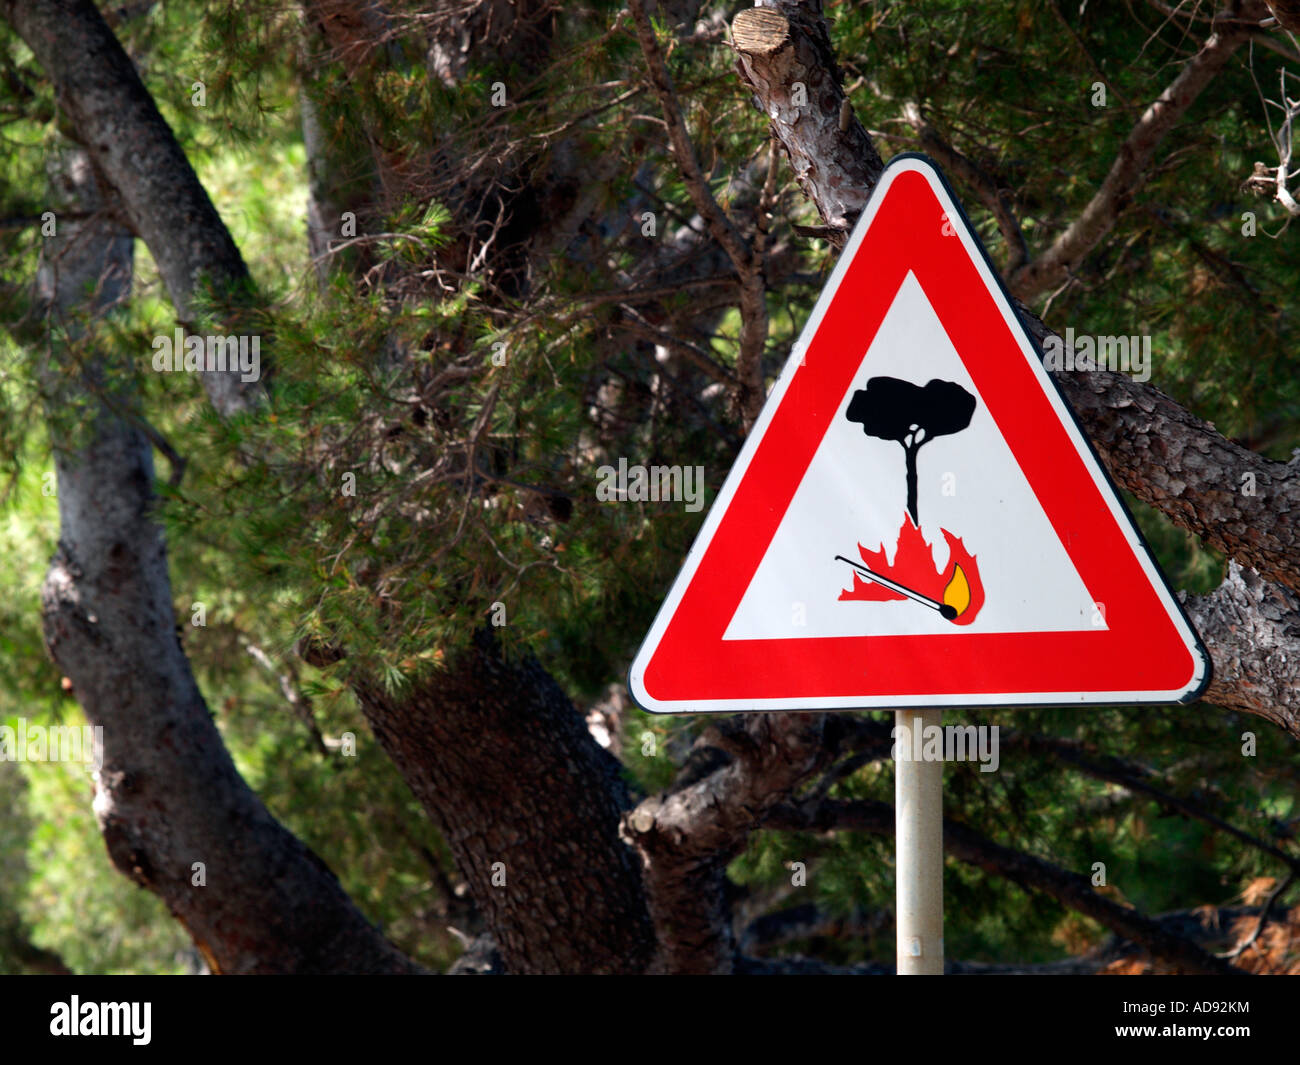 Fire Warning Hazard Sign. and. 